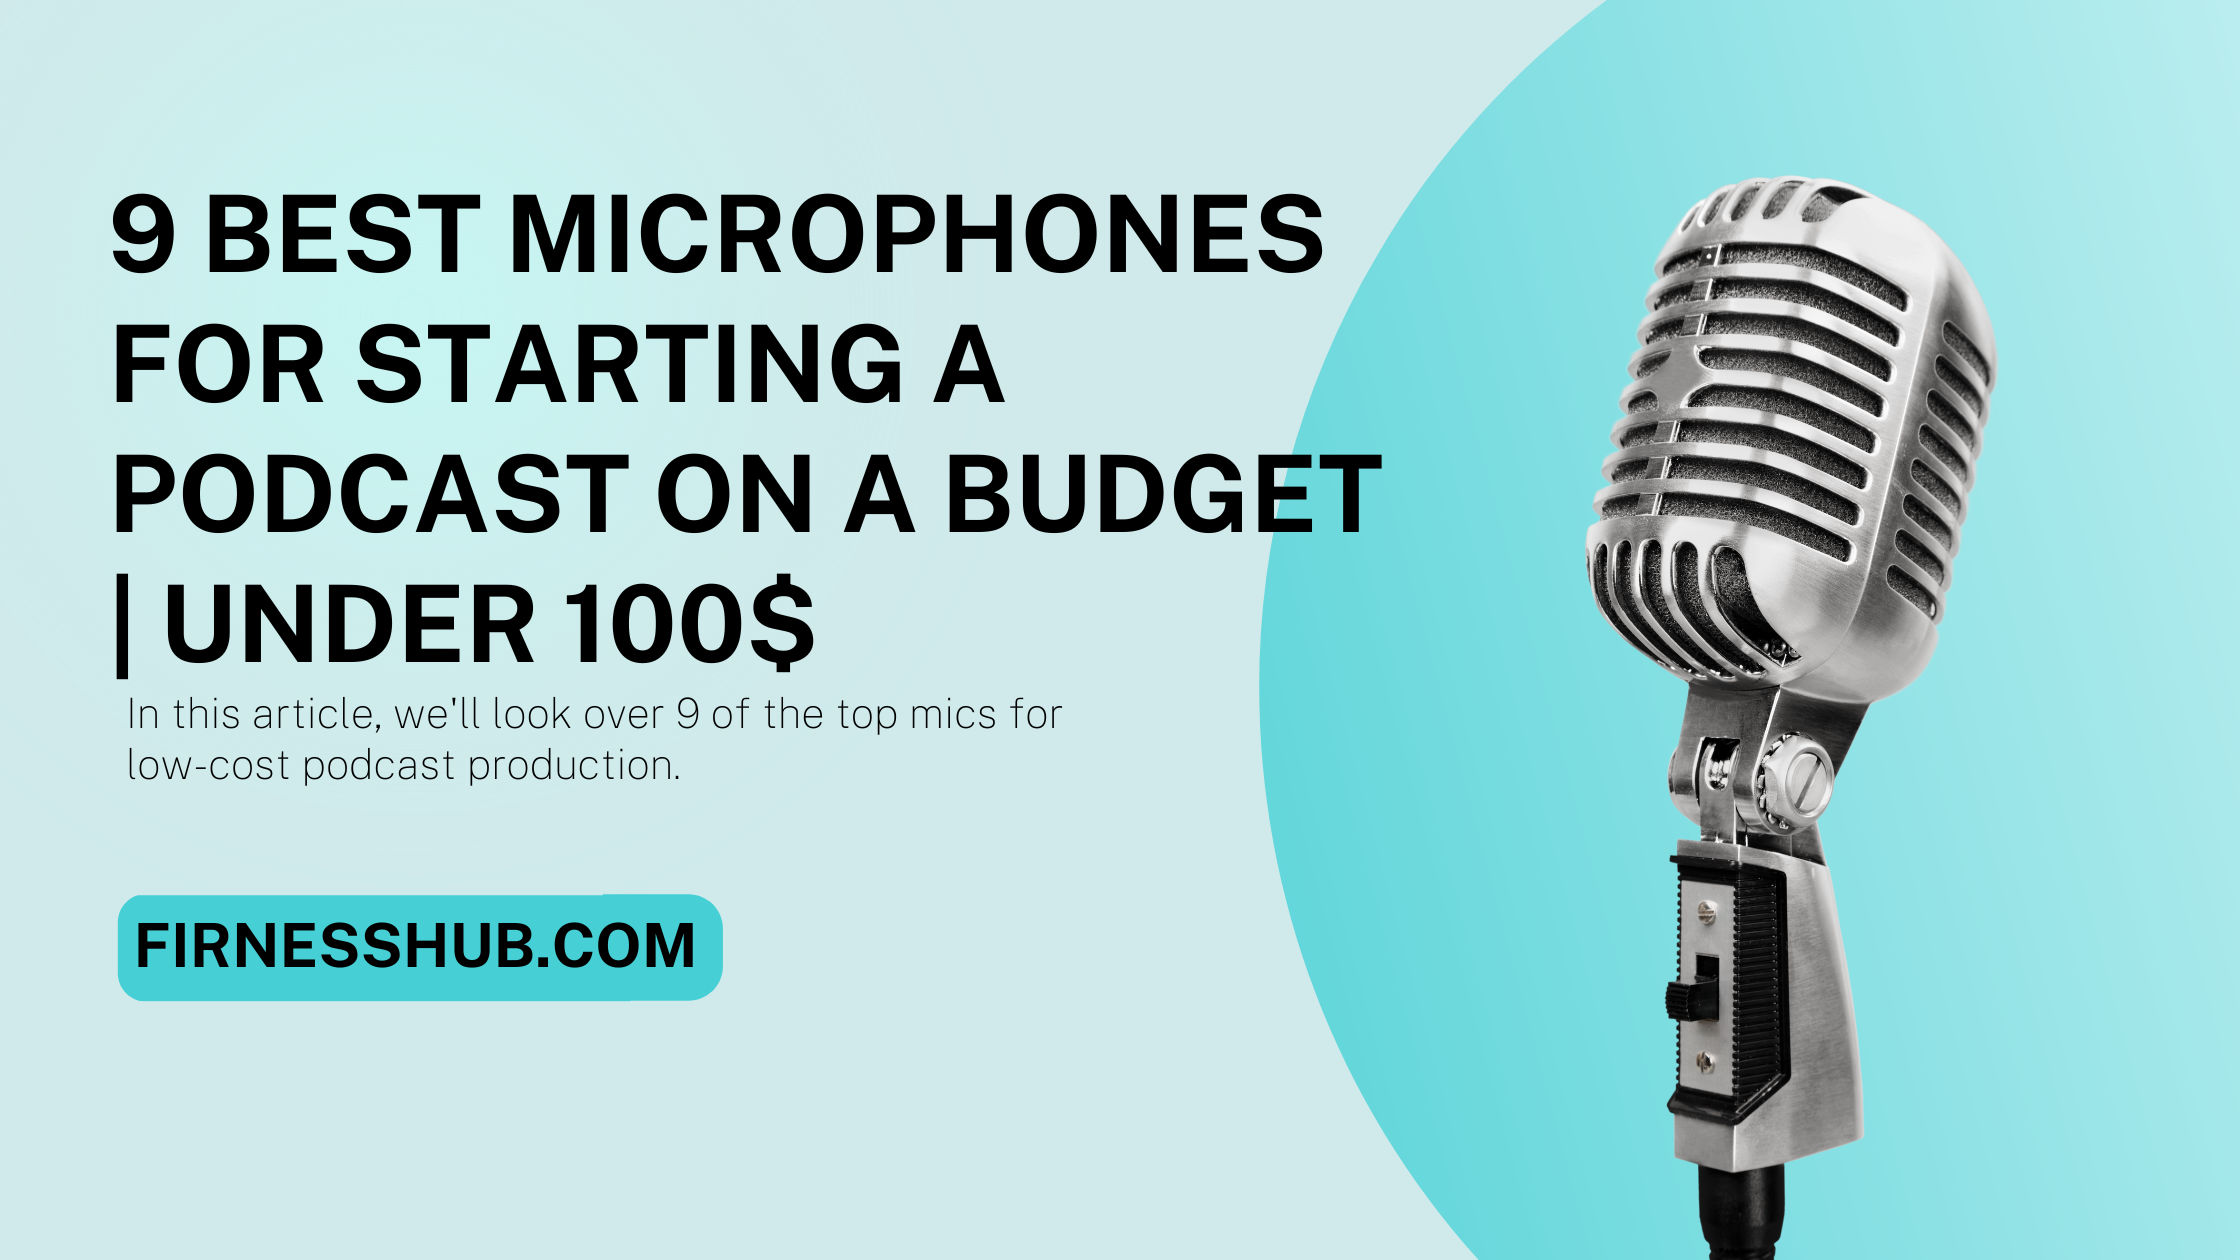 Microphones for Starting a Podcast on a Budget